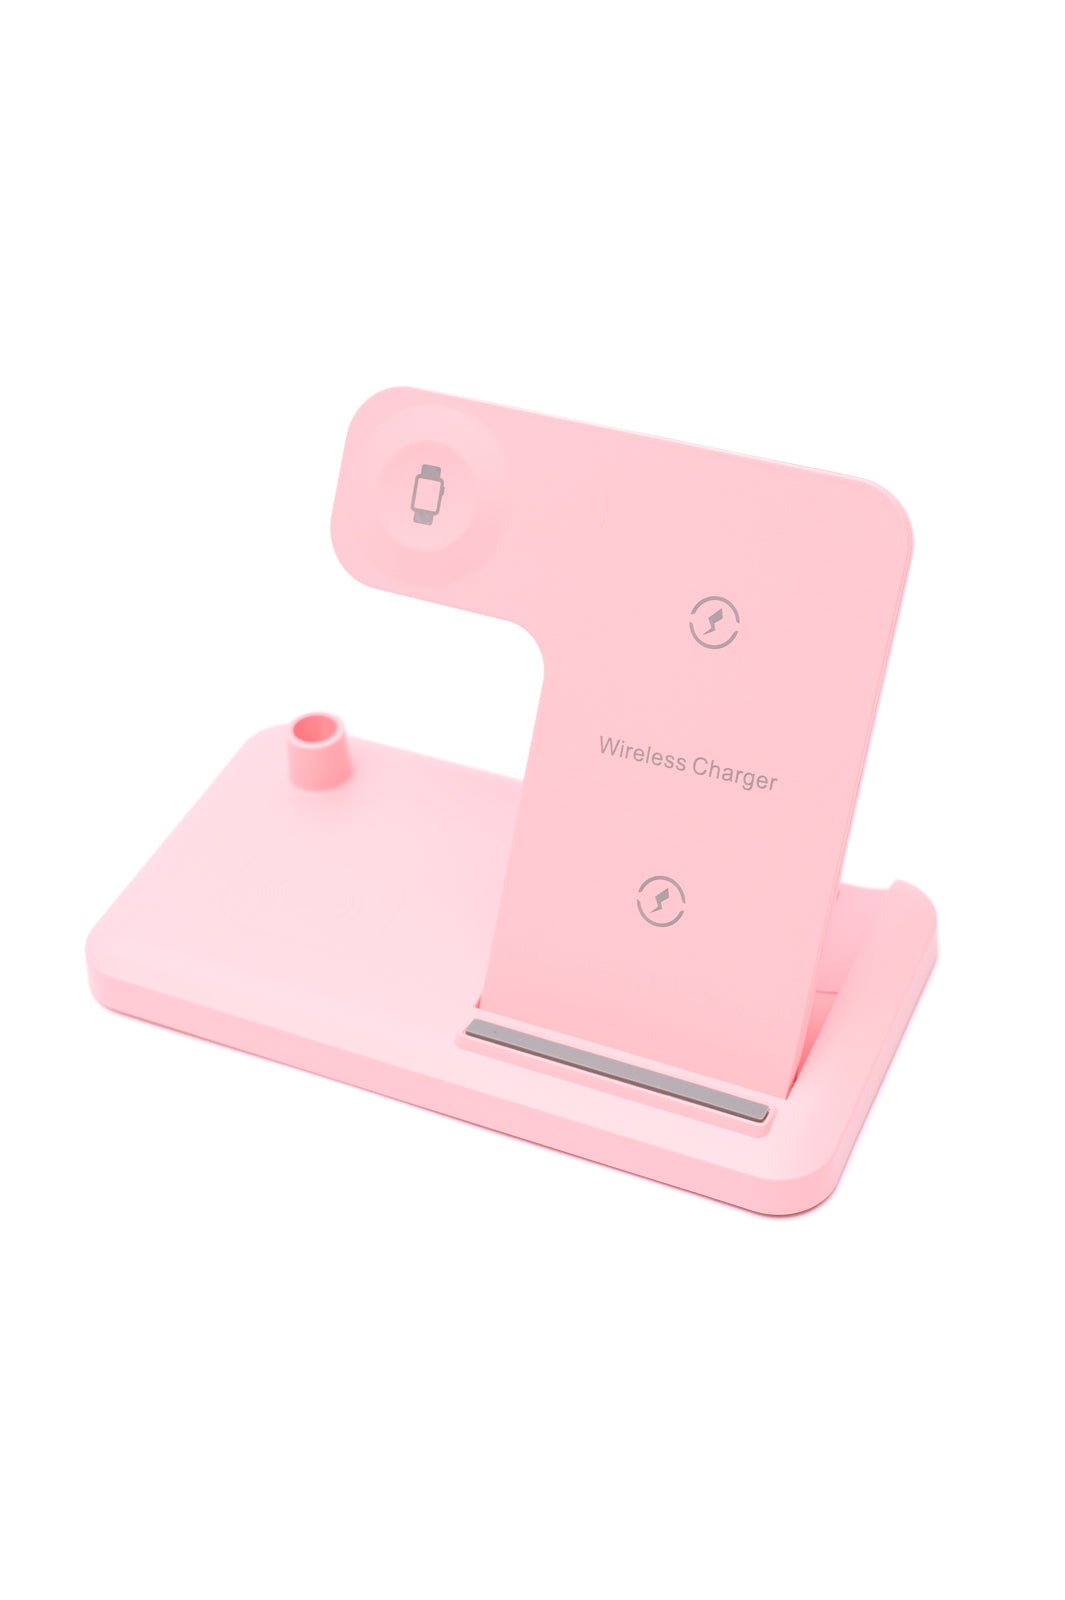 Creative Space Wireless Charger in Pink